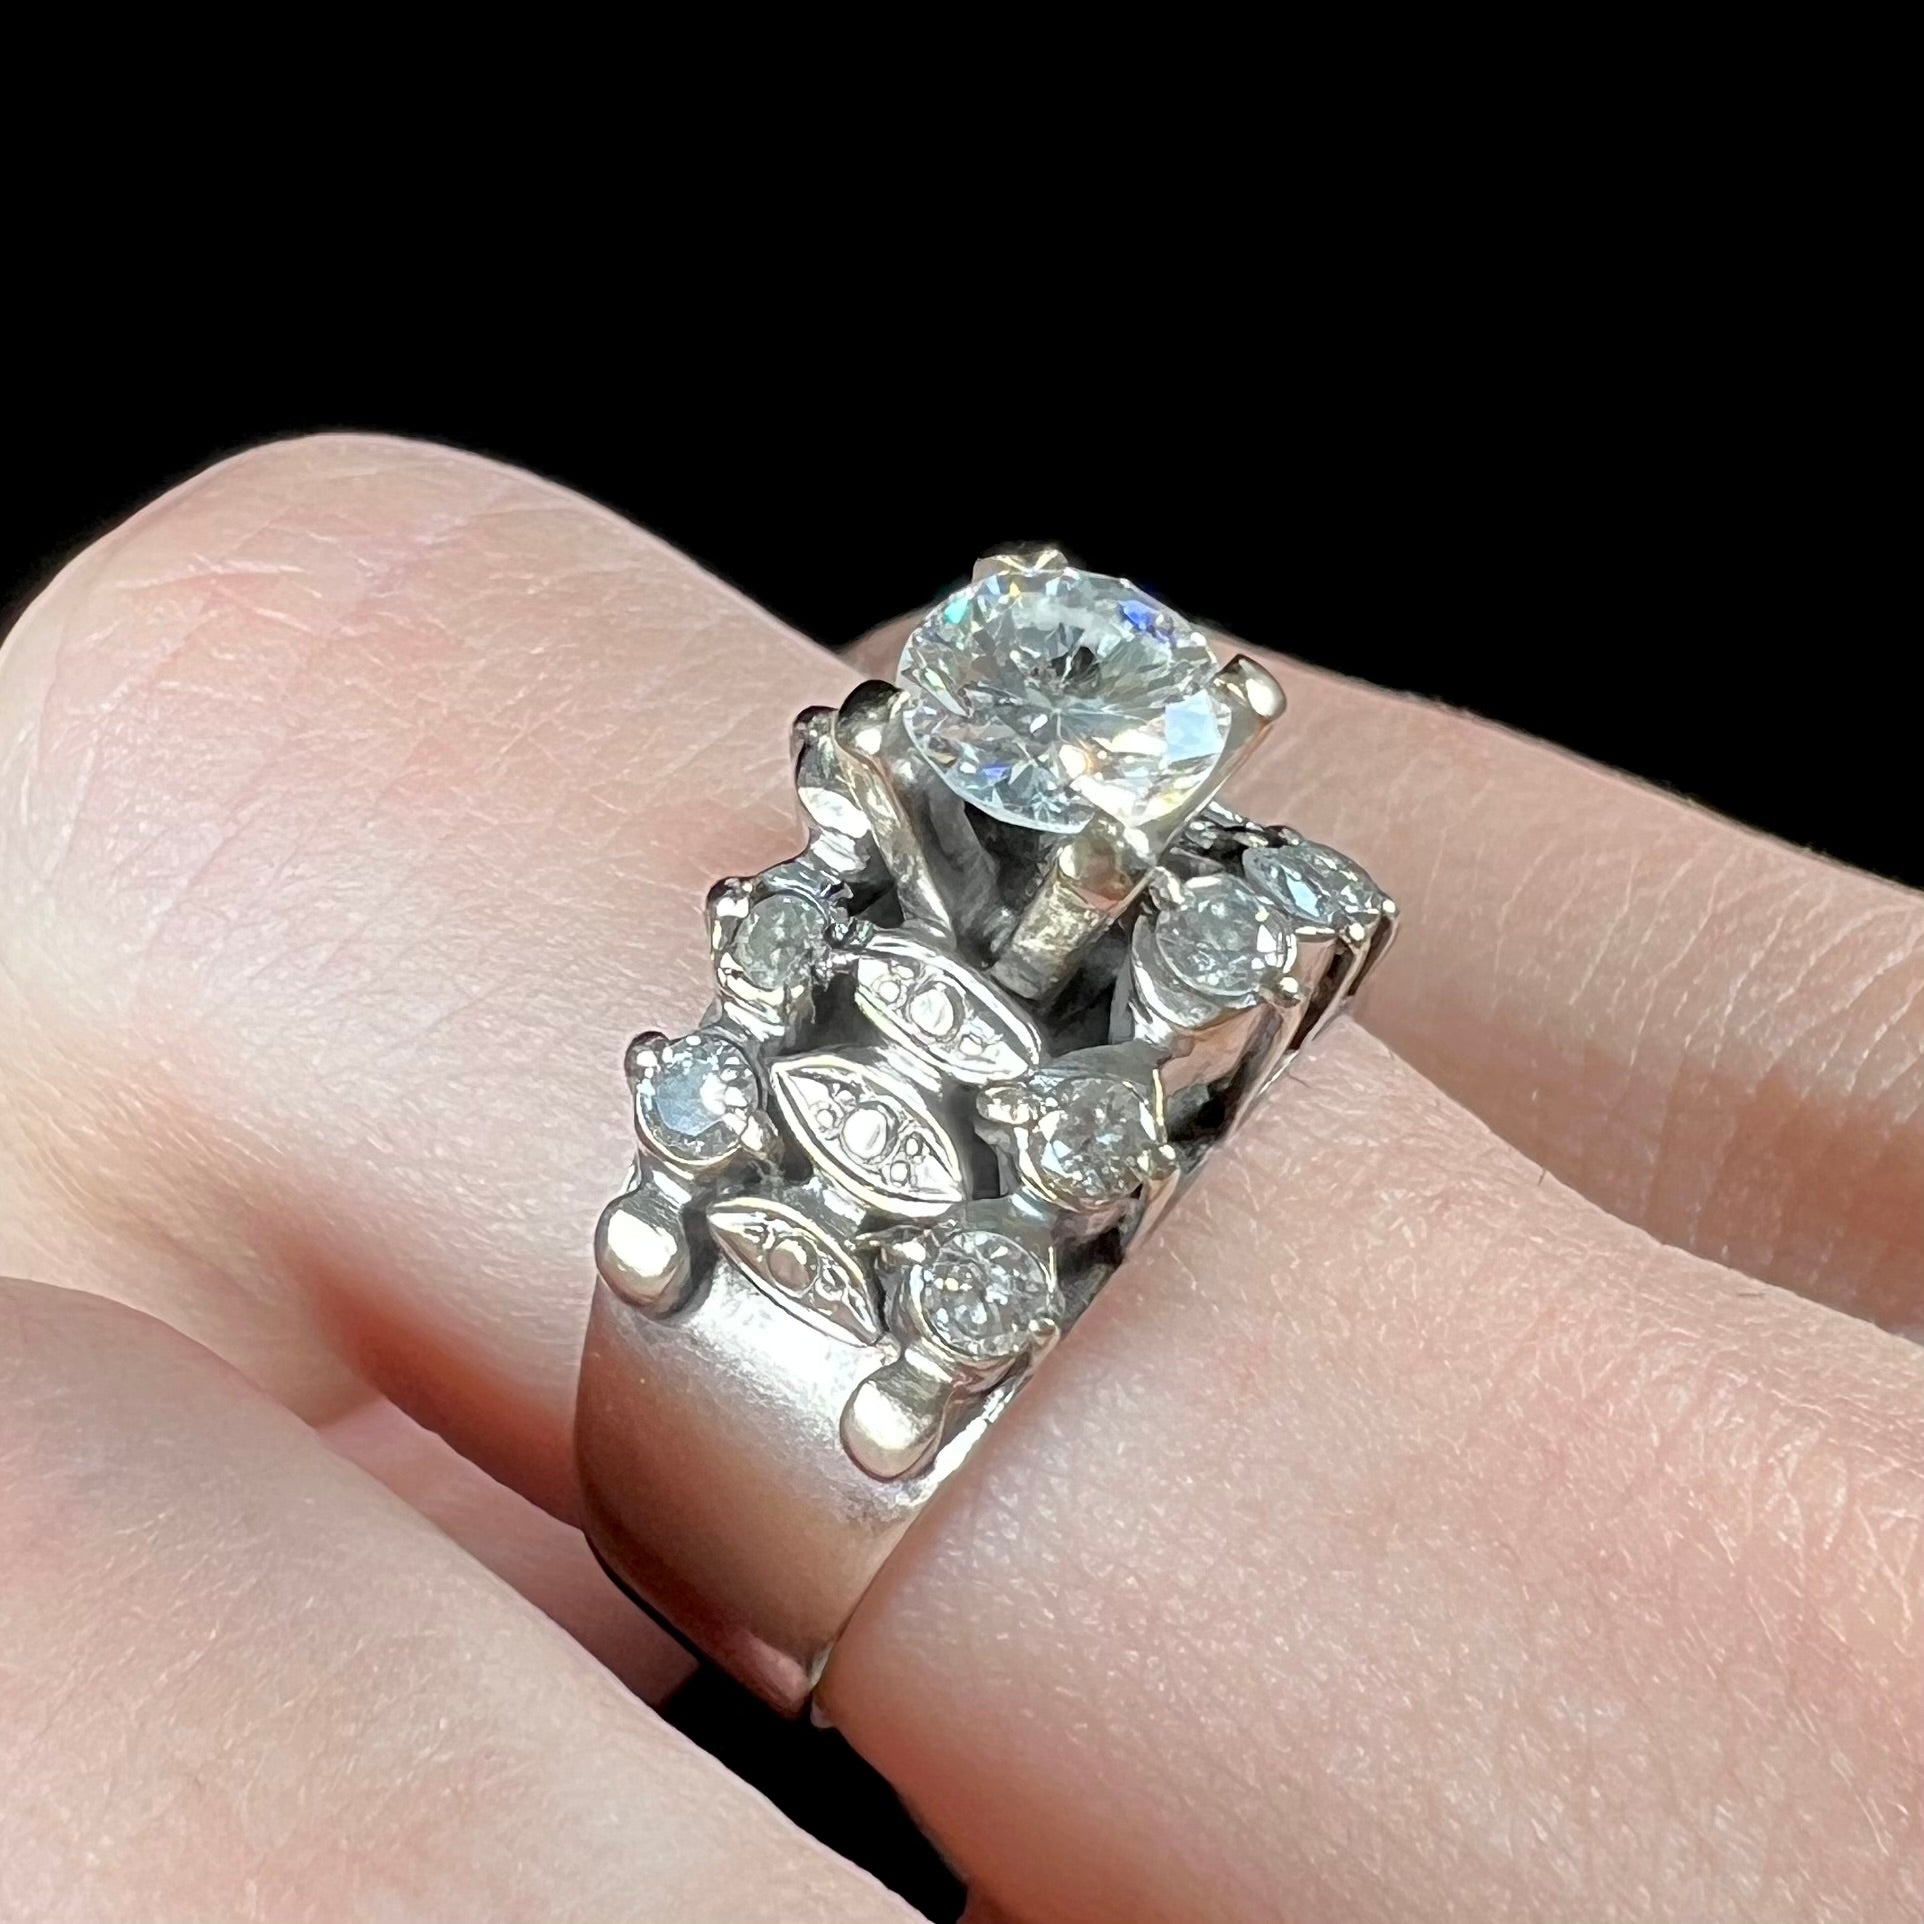 A vintage, 1940's style white gold diamond wedding ring set with a 0.68ct round diamond.  The diamond has a noticeable black crystal inclusion.